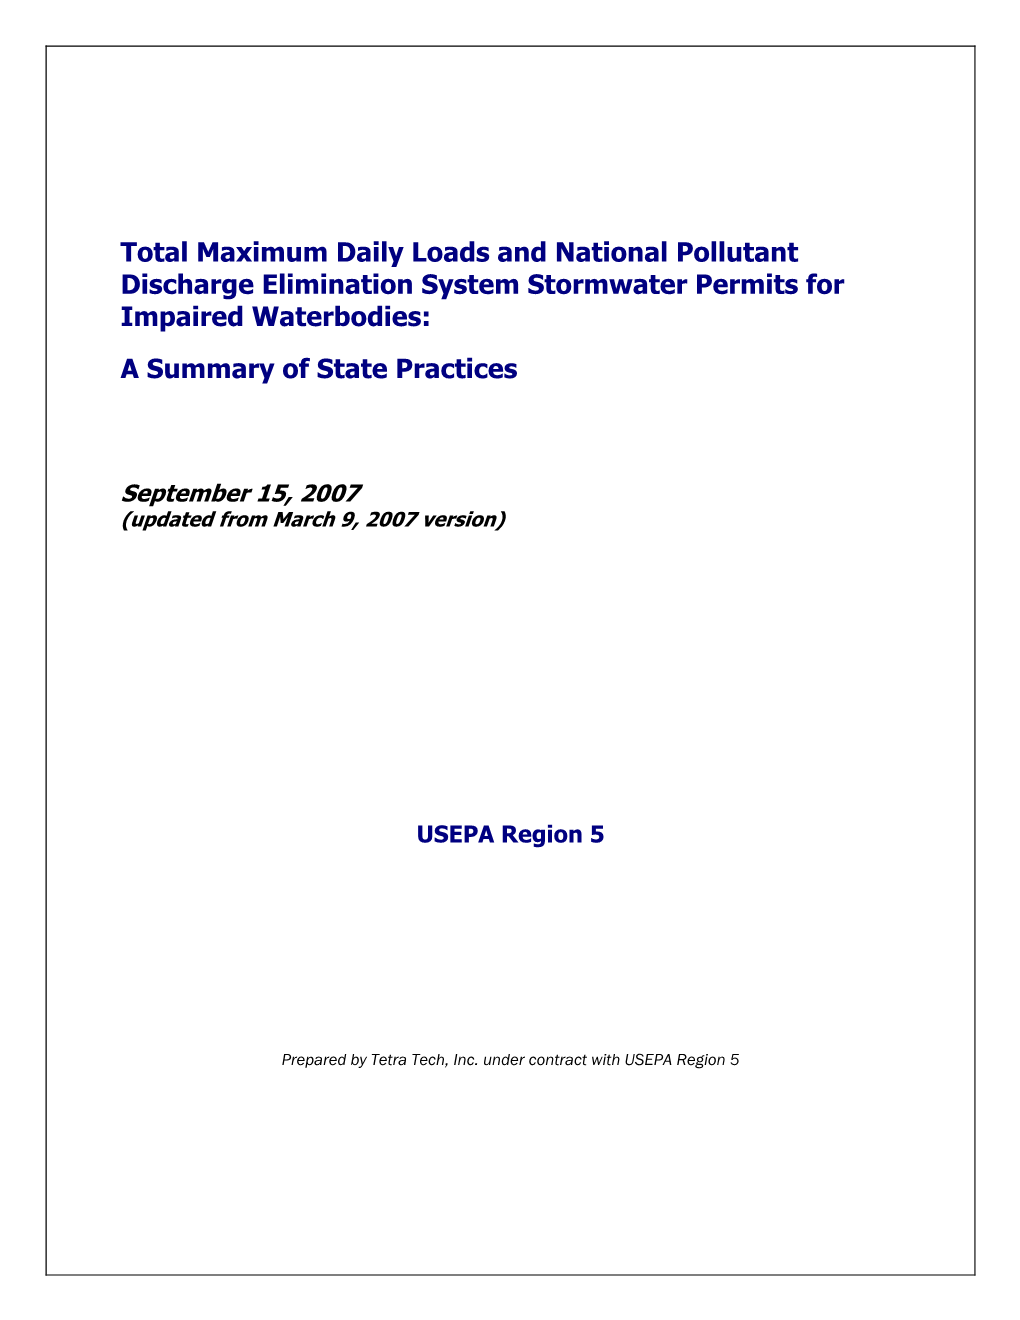 Total Maximum Daily Loads and National Pollutant Discharge Elimination System Stormwater Permits for Impaired Waterbodies: a Summary of State Practices